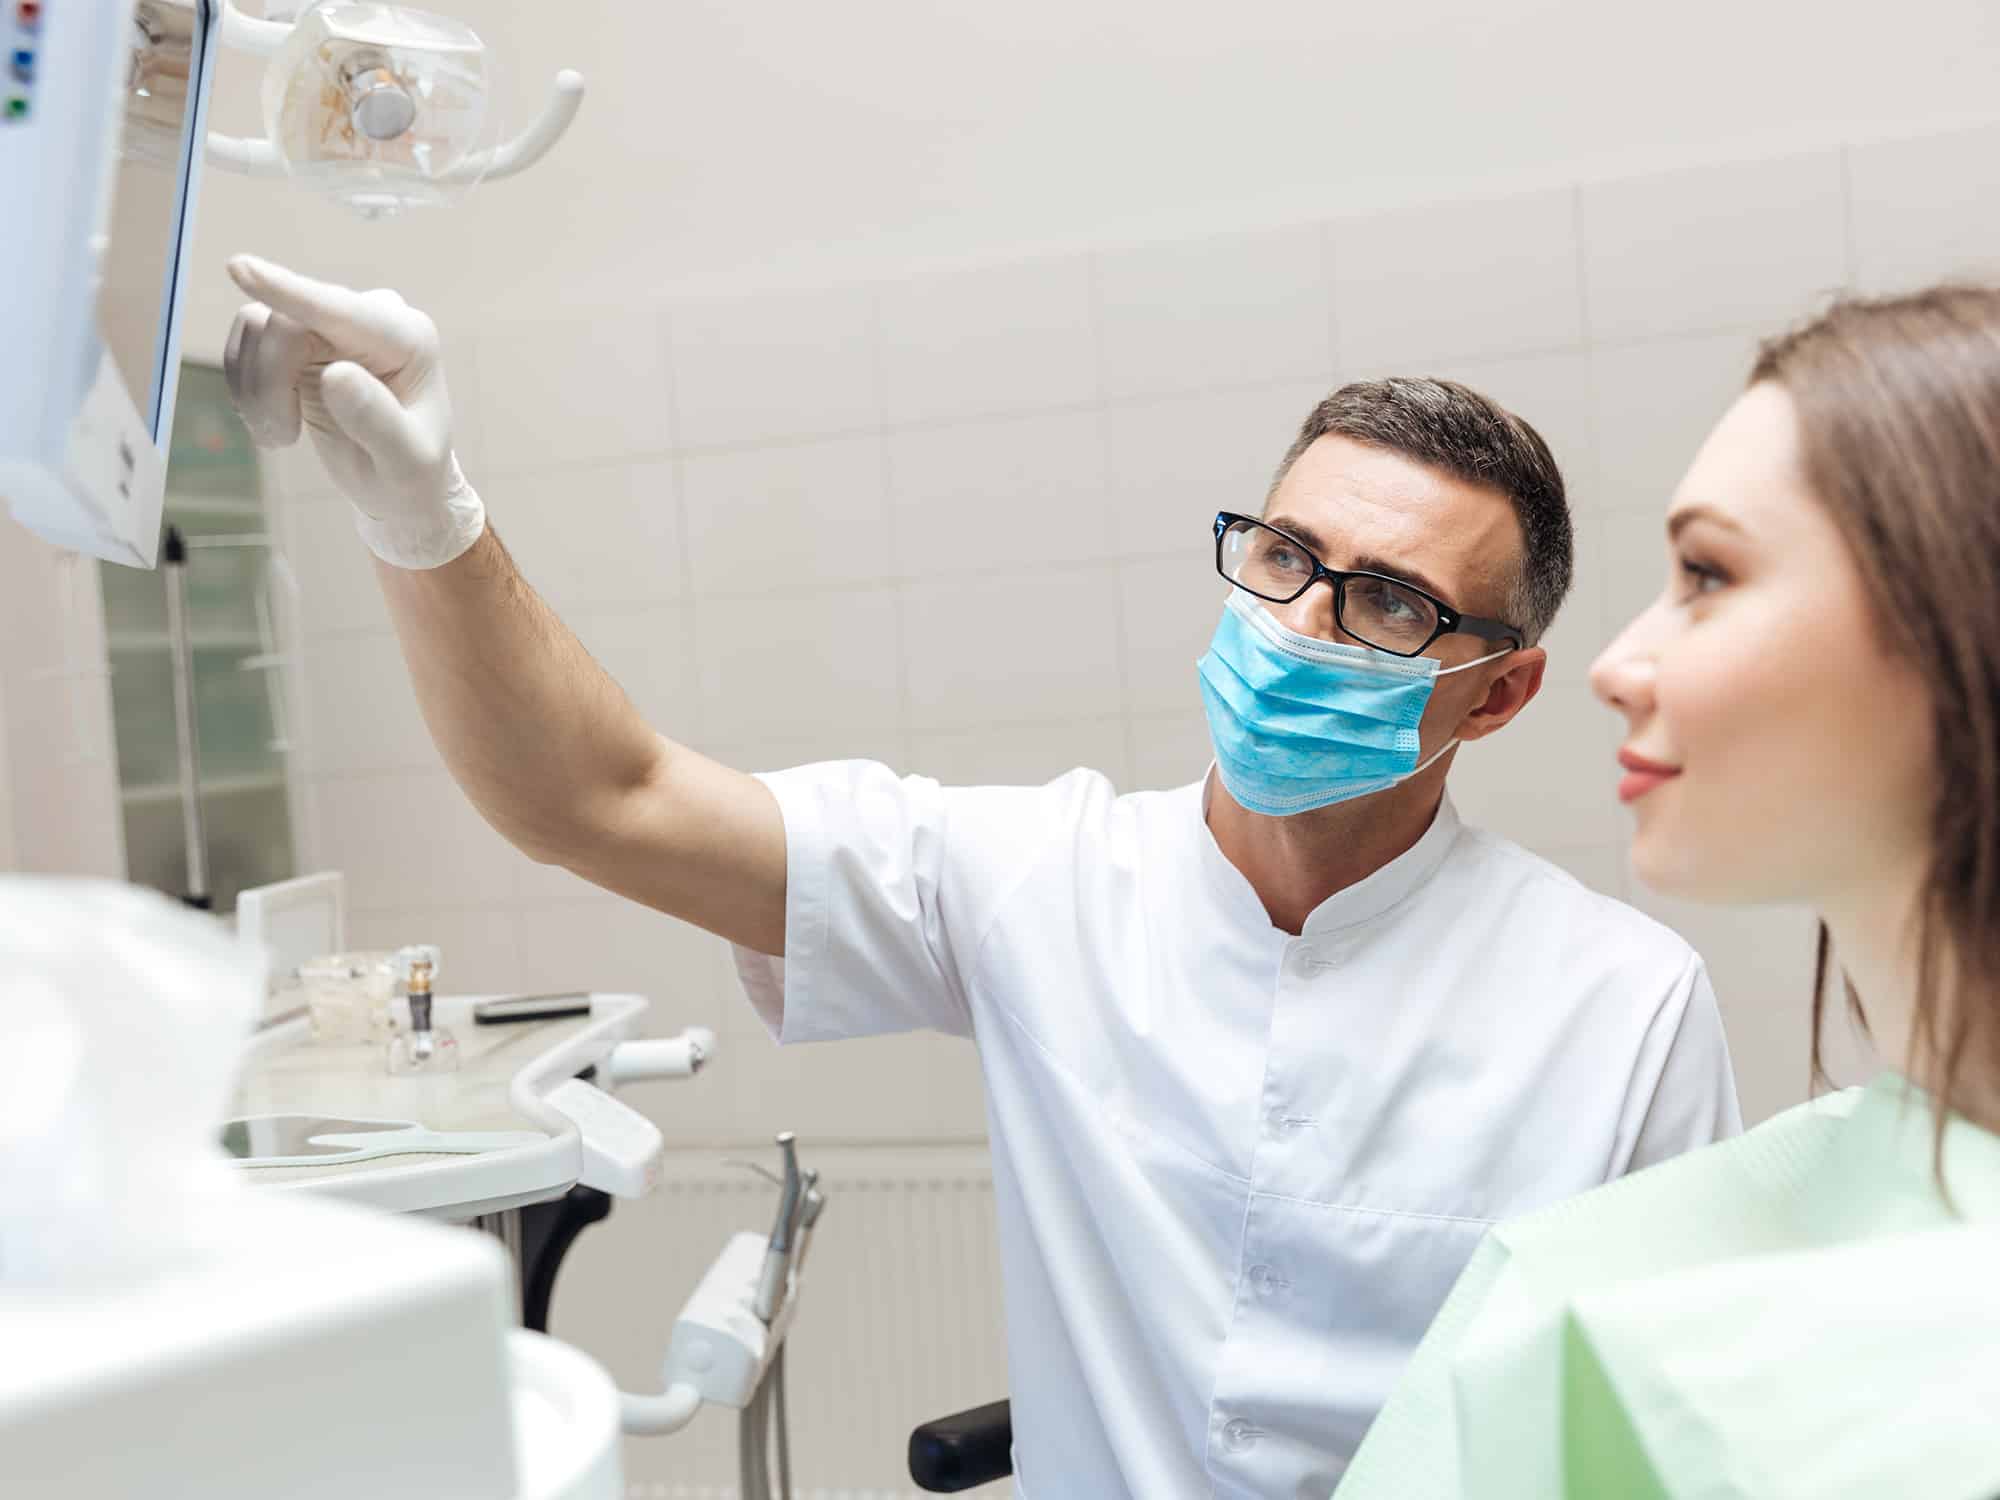 How Dental Marketing Can Overcome the New Patient Objections After COVID-19